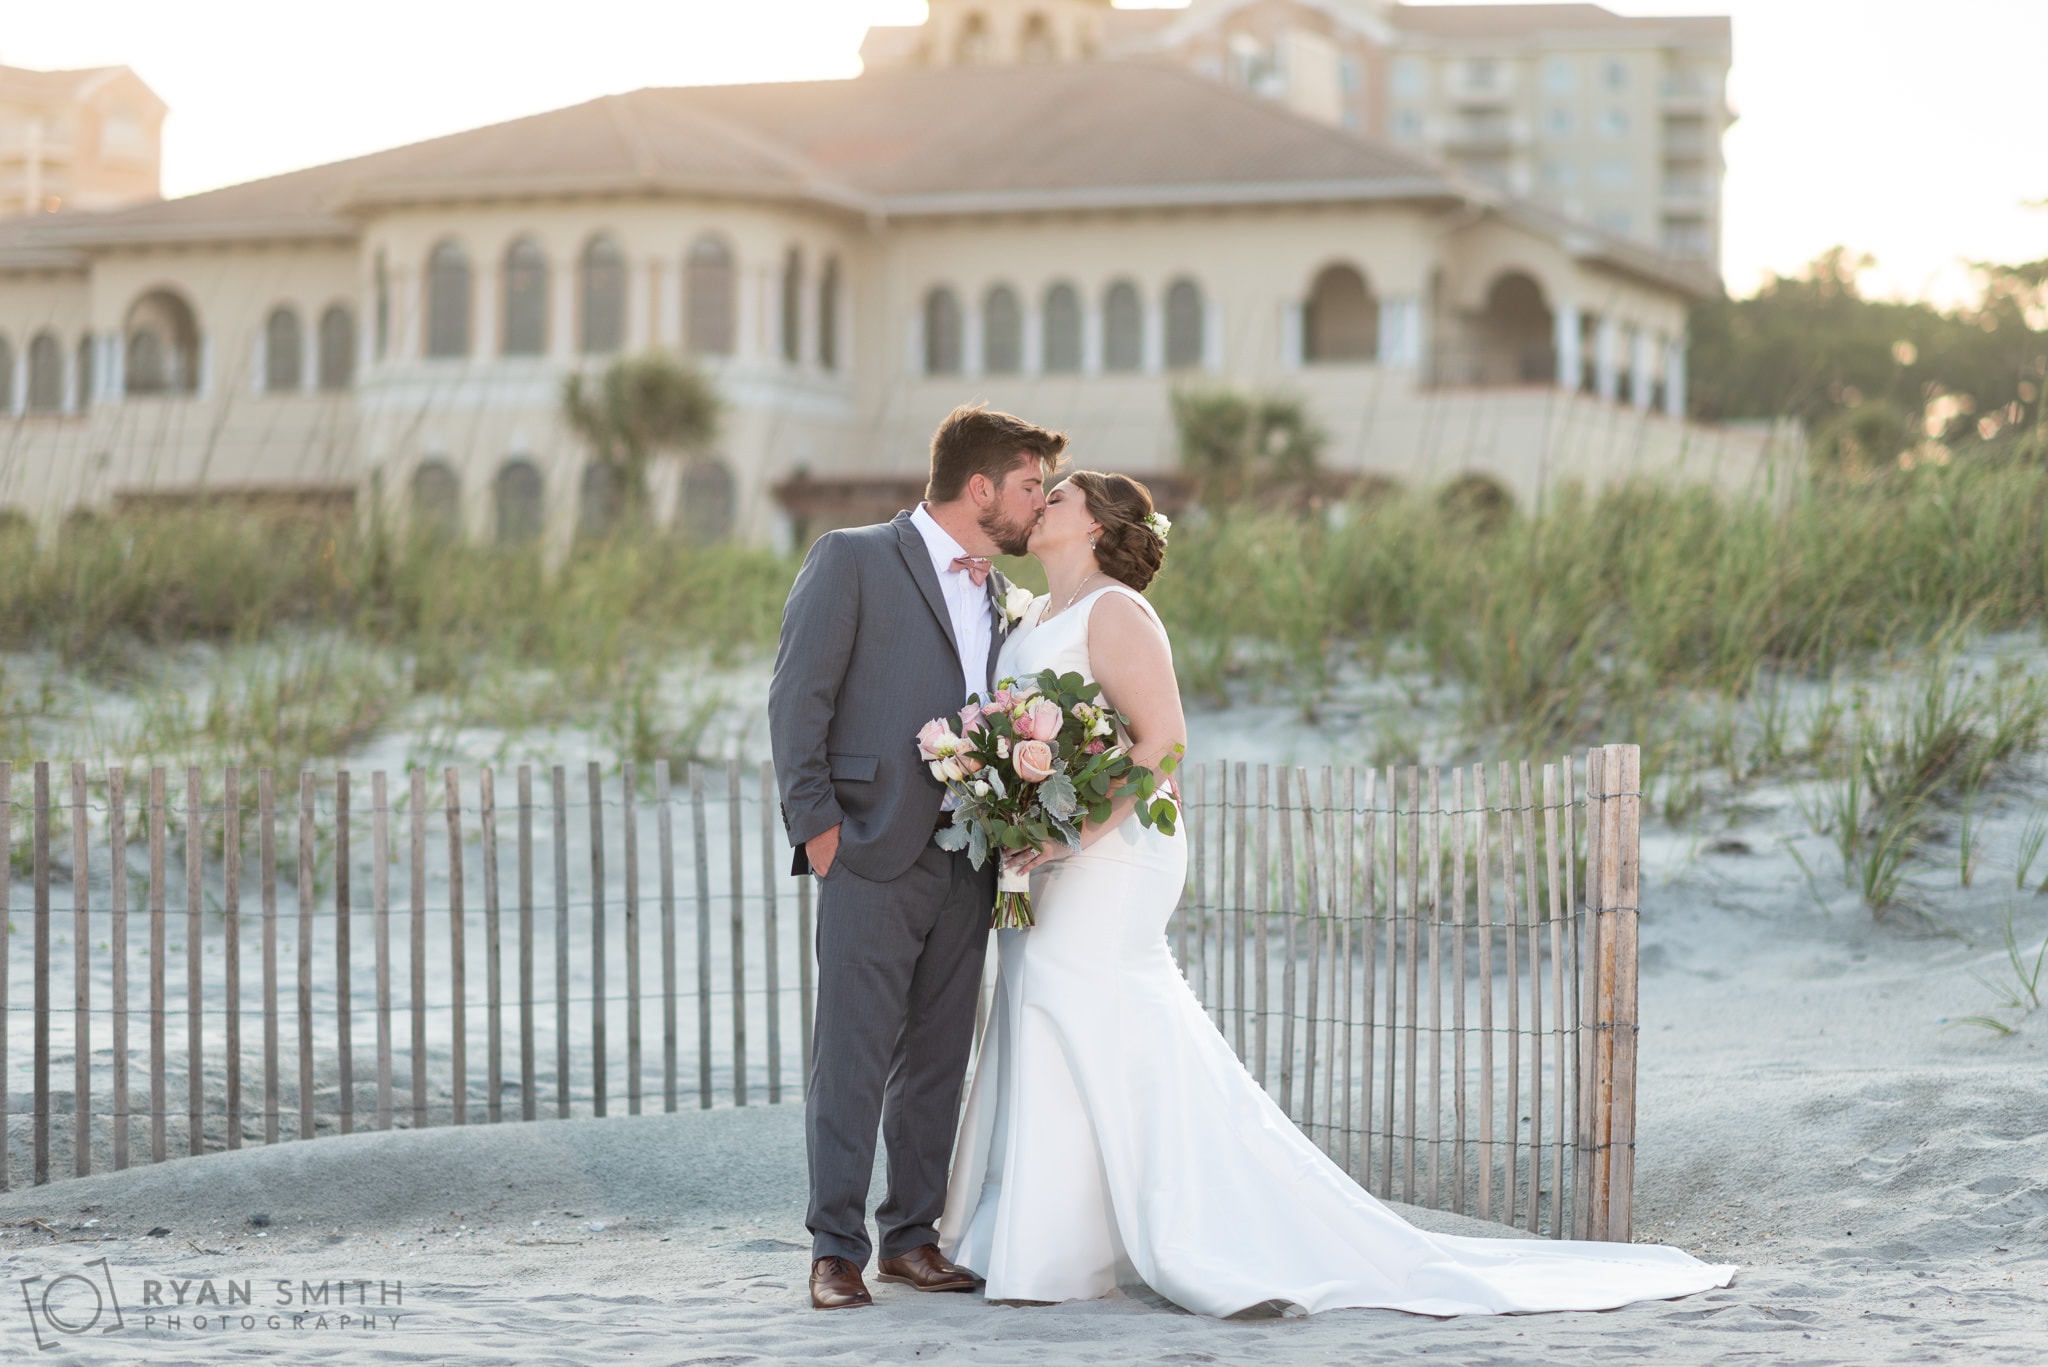 Bride and groom with sunset and clubhouse in the background - Grande Dunes Ocean Club - Myrtle Beach